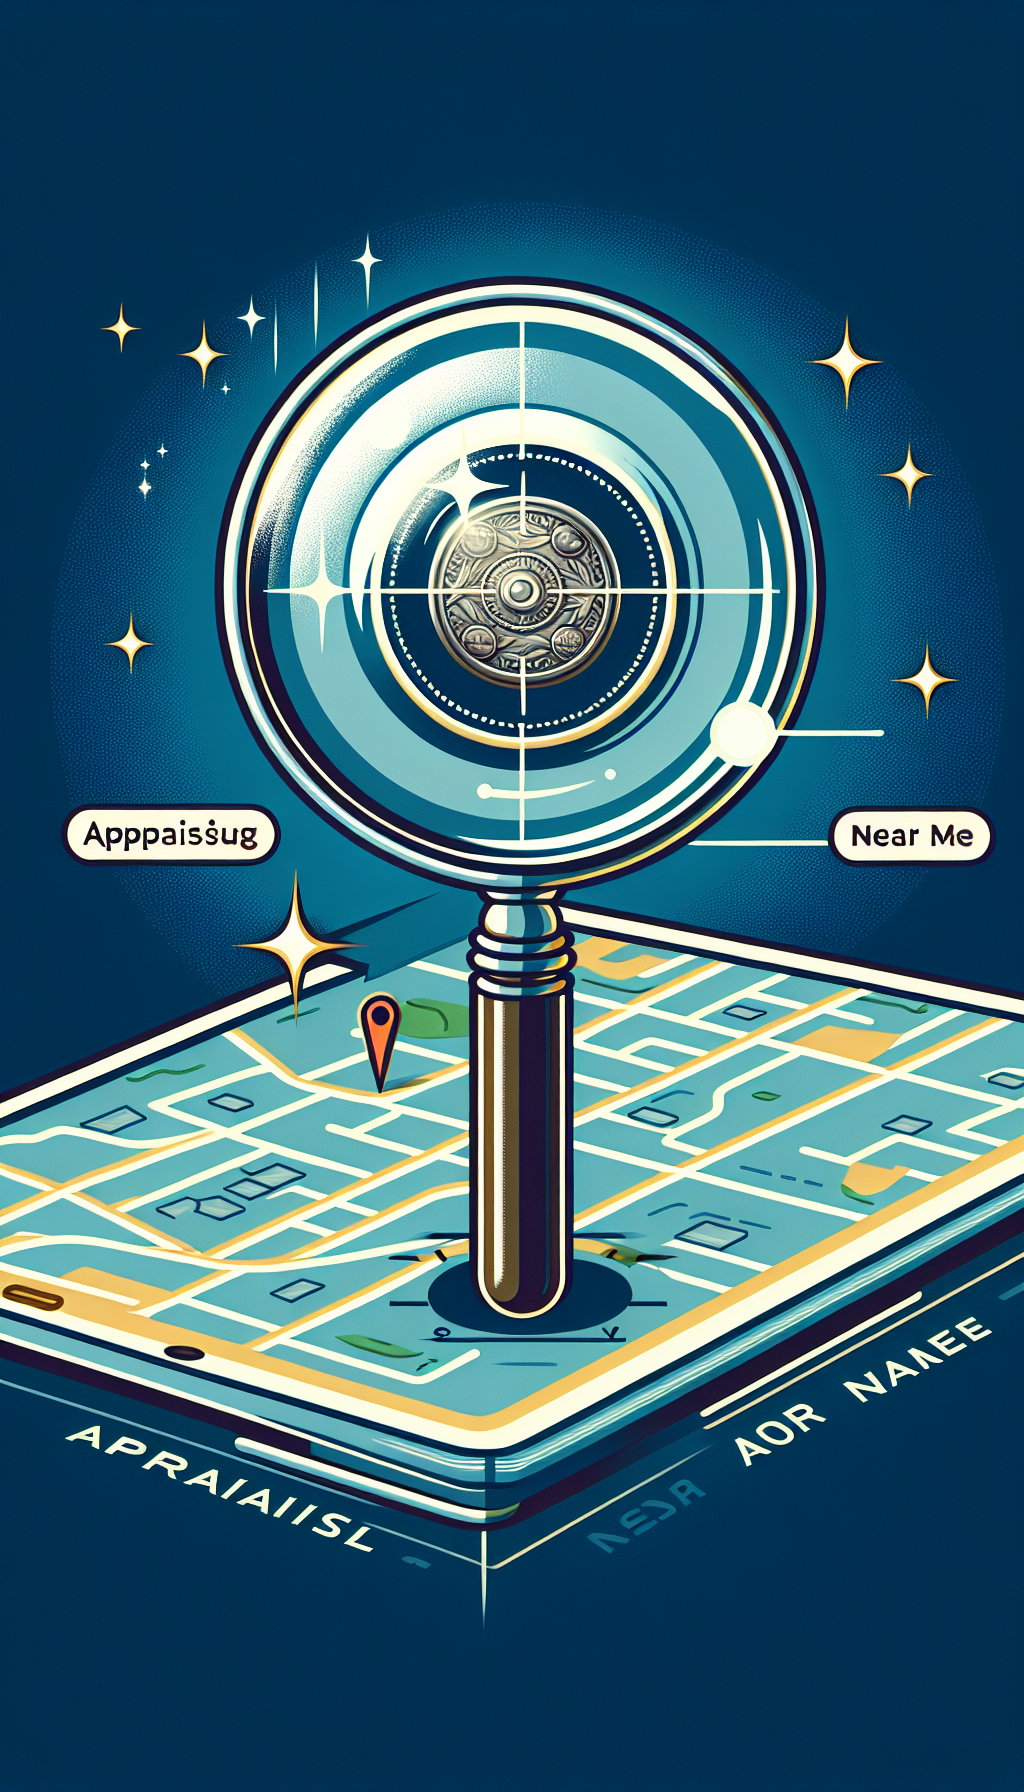 An illustration showcasing a magnifying glass hovering over a map, pinpointing a local area with a sparkling rare coin underneath. The glass not only magnifies the coin's intricate details but also the phrase "Appraisal Near Me", emphasizing the importance of local expertise in providing precise valuations for rare collectibles. The style transitions from realistic details under the glass to a stylized, simplified map.